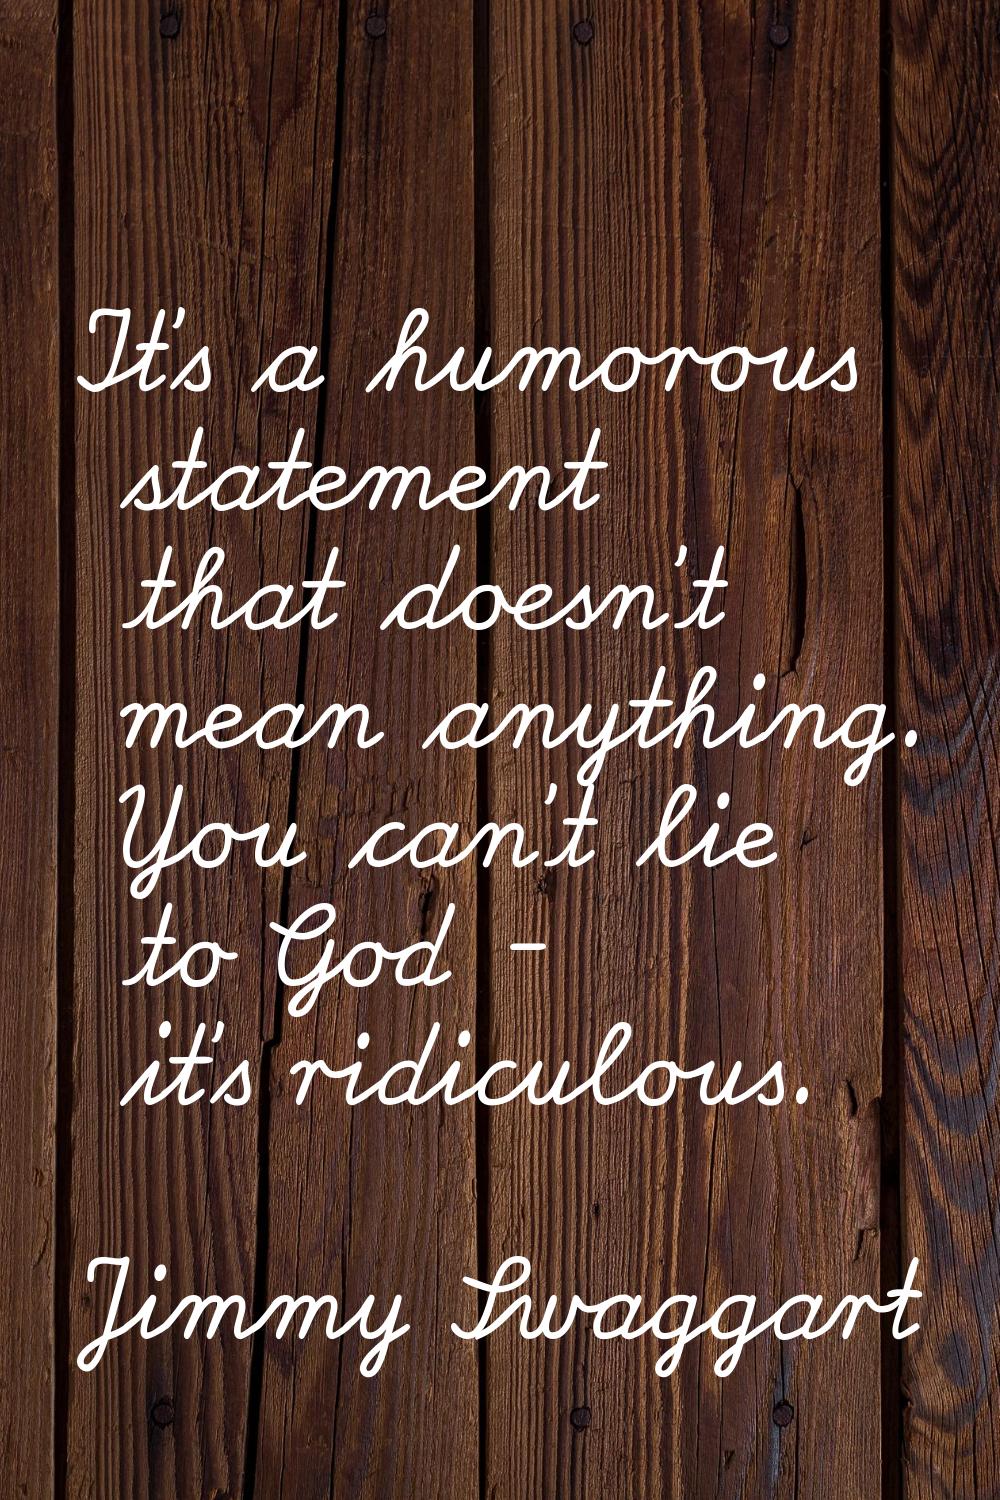 It's a humorous statement that doesn't mean anything. You can't lie to God - it's ridiculous.